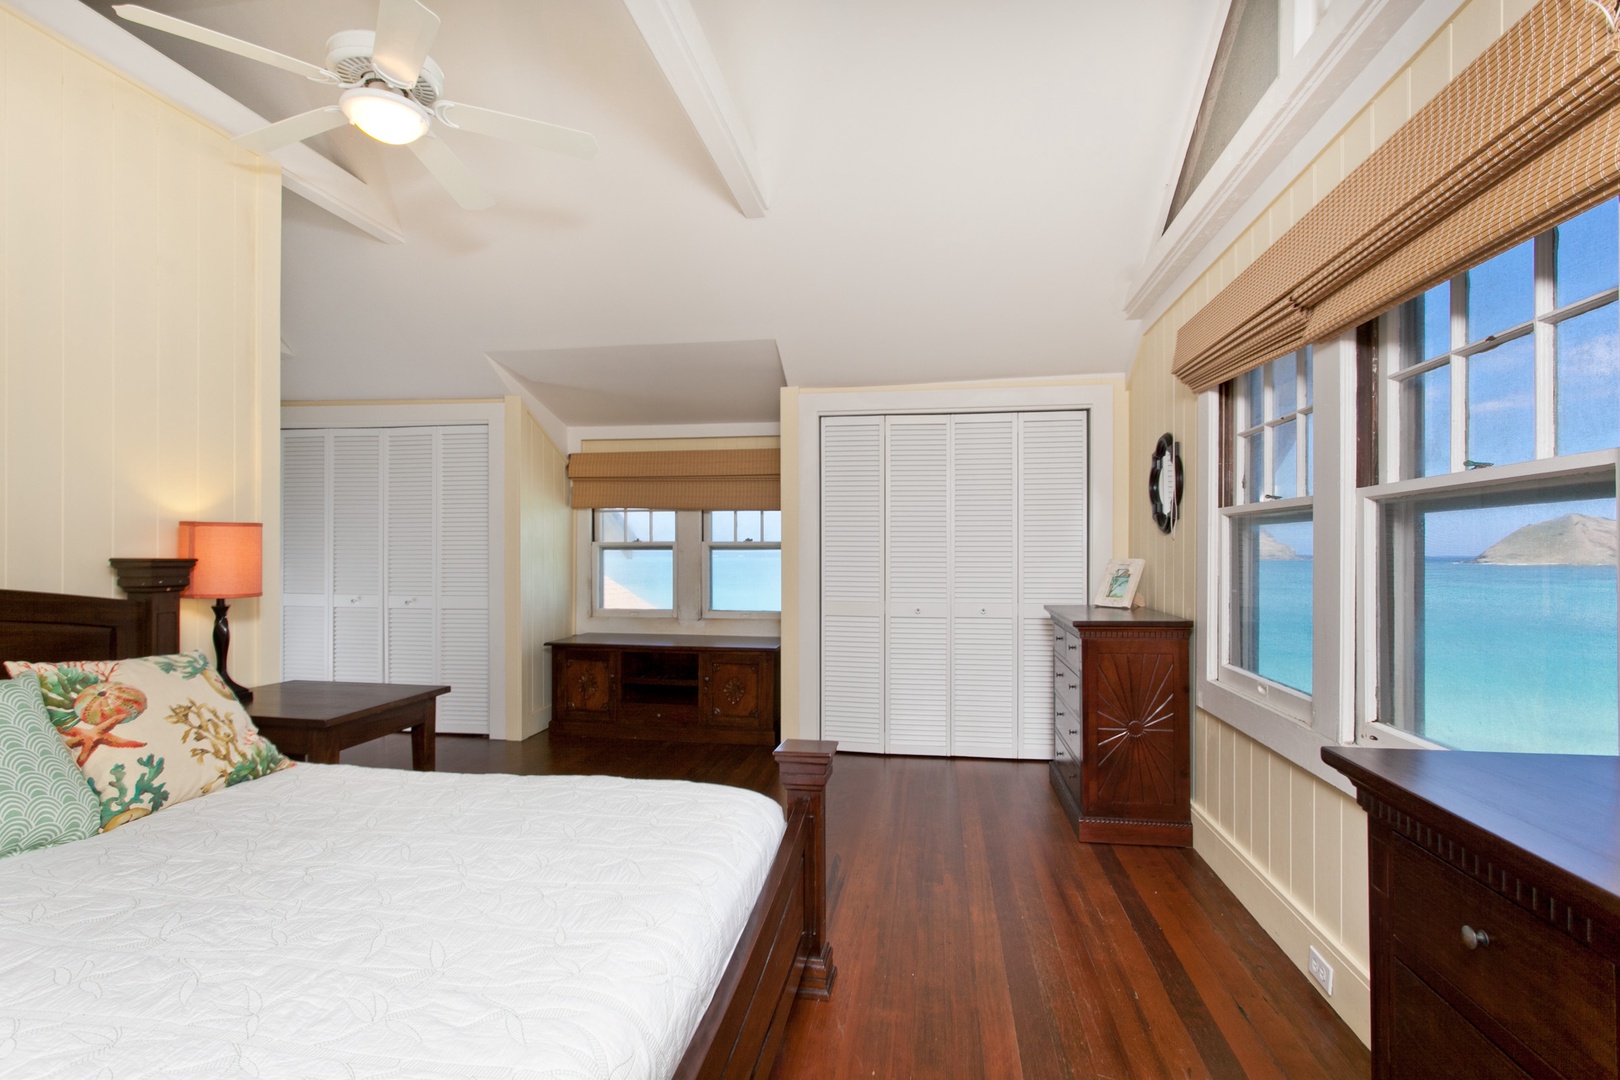 Kailua Vacation Rentals, Hale Mahina Lanikai* - Third guest bedroom with a king bed and panoramic ocean views.